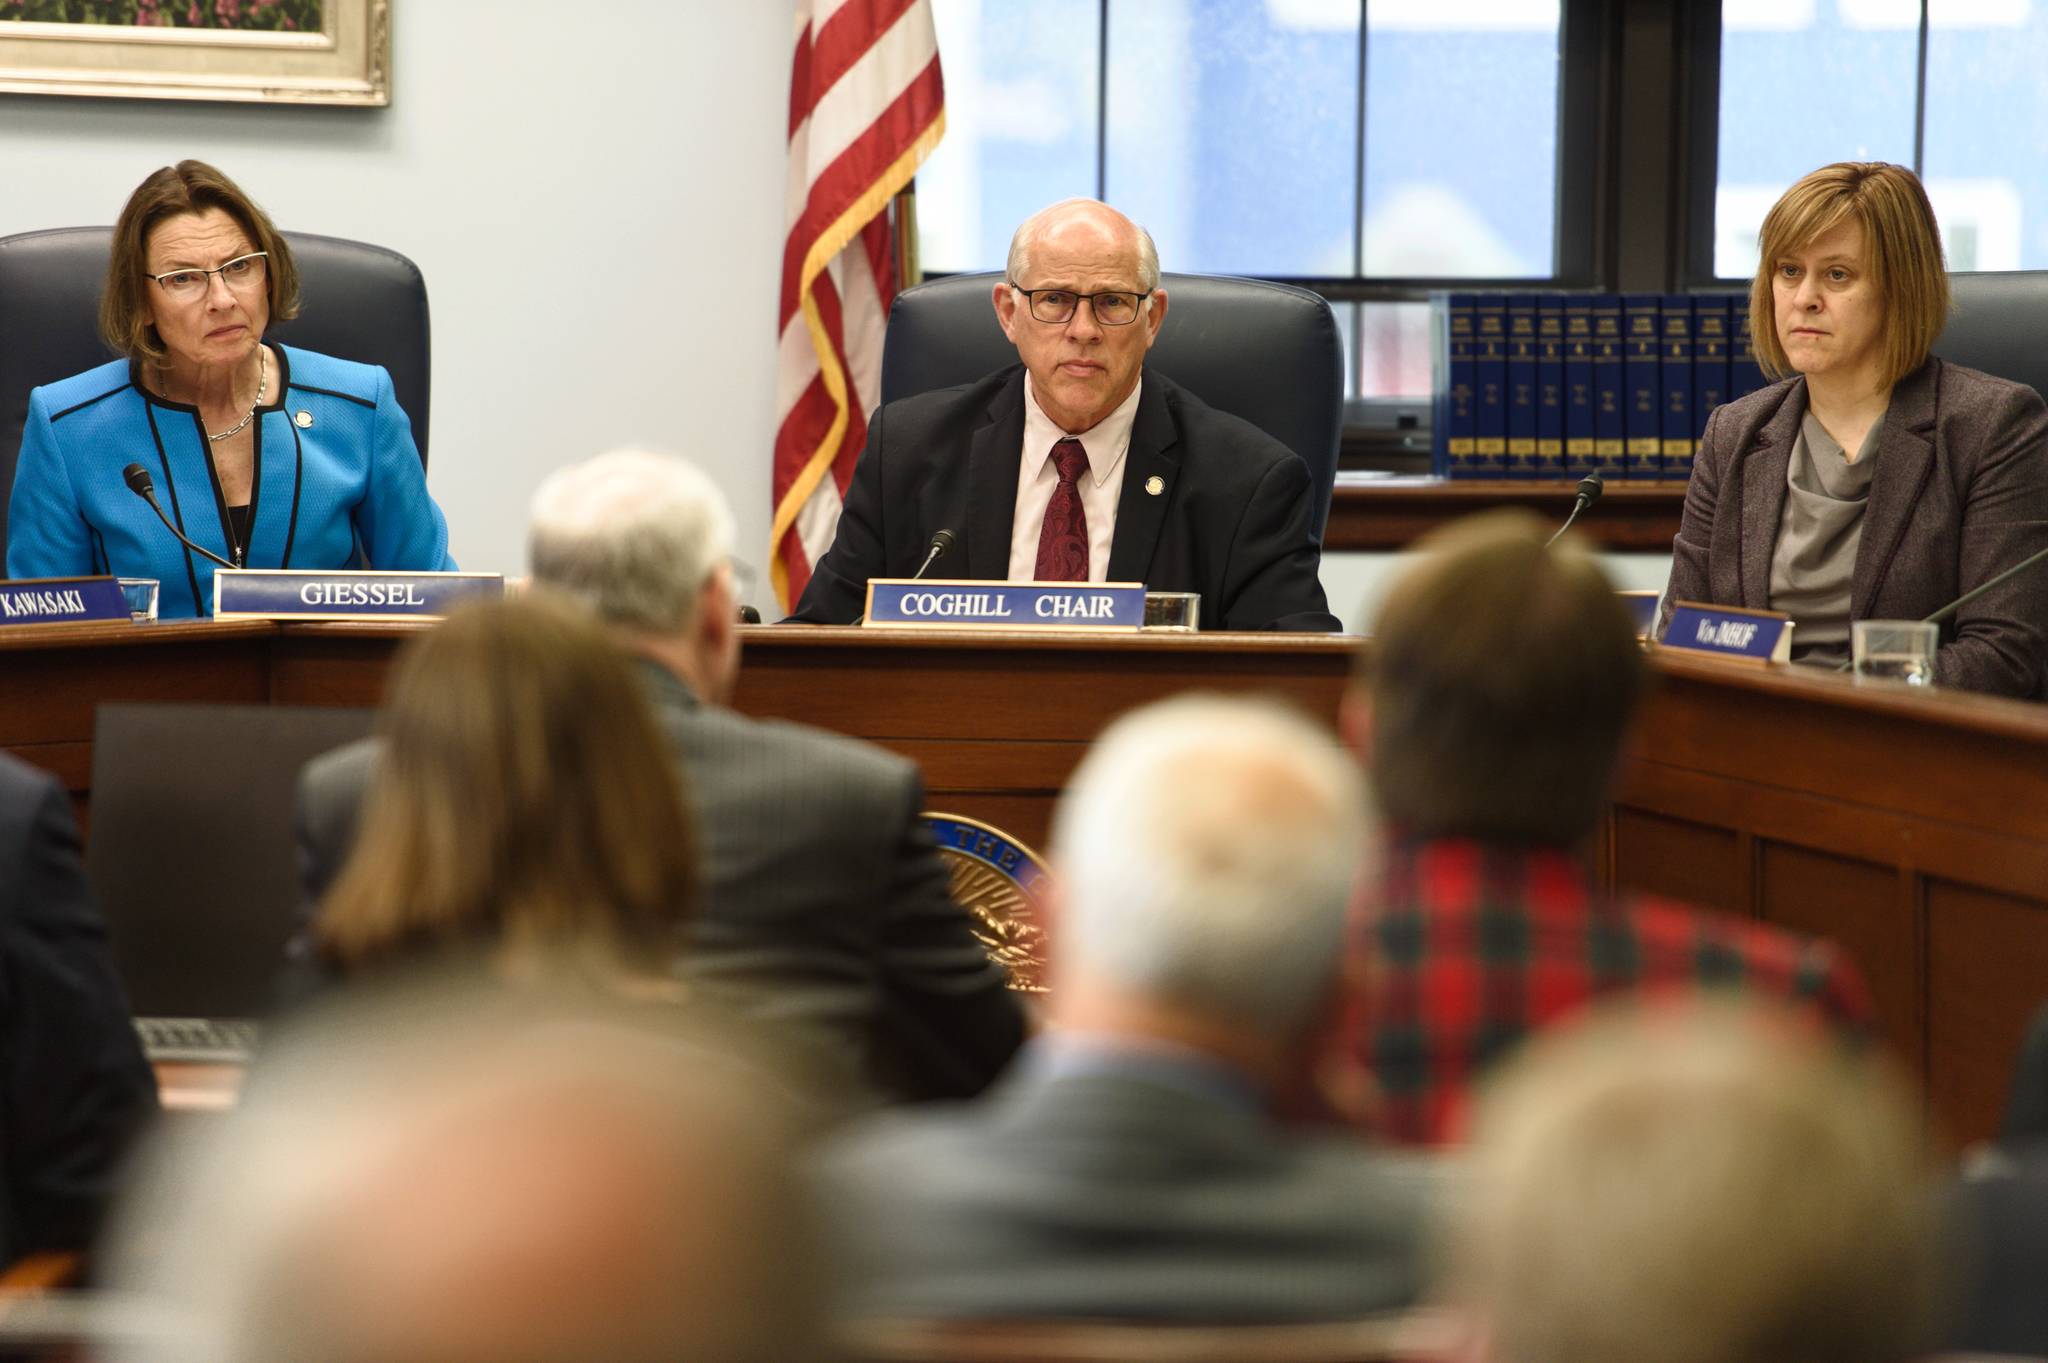 Sen. Cathy Giessel, R-Anchorage, left, Sen. John Coghill, R-North Pole, center, and Sen. Mia Costello, R-Anchorage, listen to Sen. Bert Stedman, R-Sitka, present SB 1002, a bill to provide a Permanent Fund Dividend of $1,600, to the Senate Rules Committee at the Capitol on Monday, June 3, 2019. (Michael Penn | Juneau Empire)